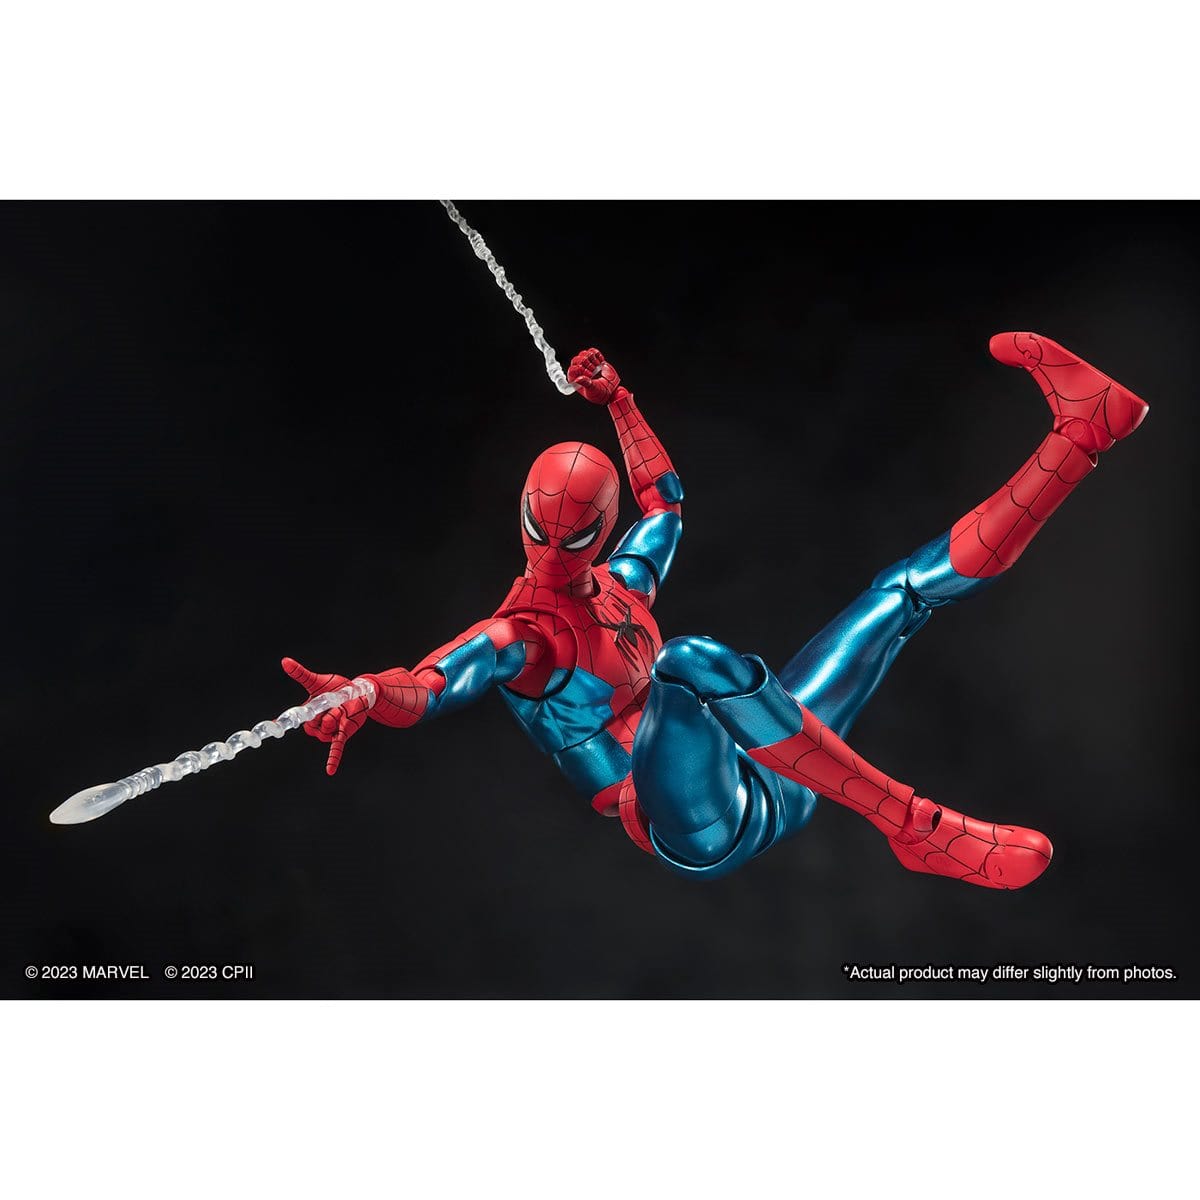 Tamashii Nations S.H. Figuarts Spider-Man: No Way Home Spider-Man (New Red and Blue Suit) Action Figure